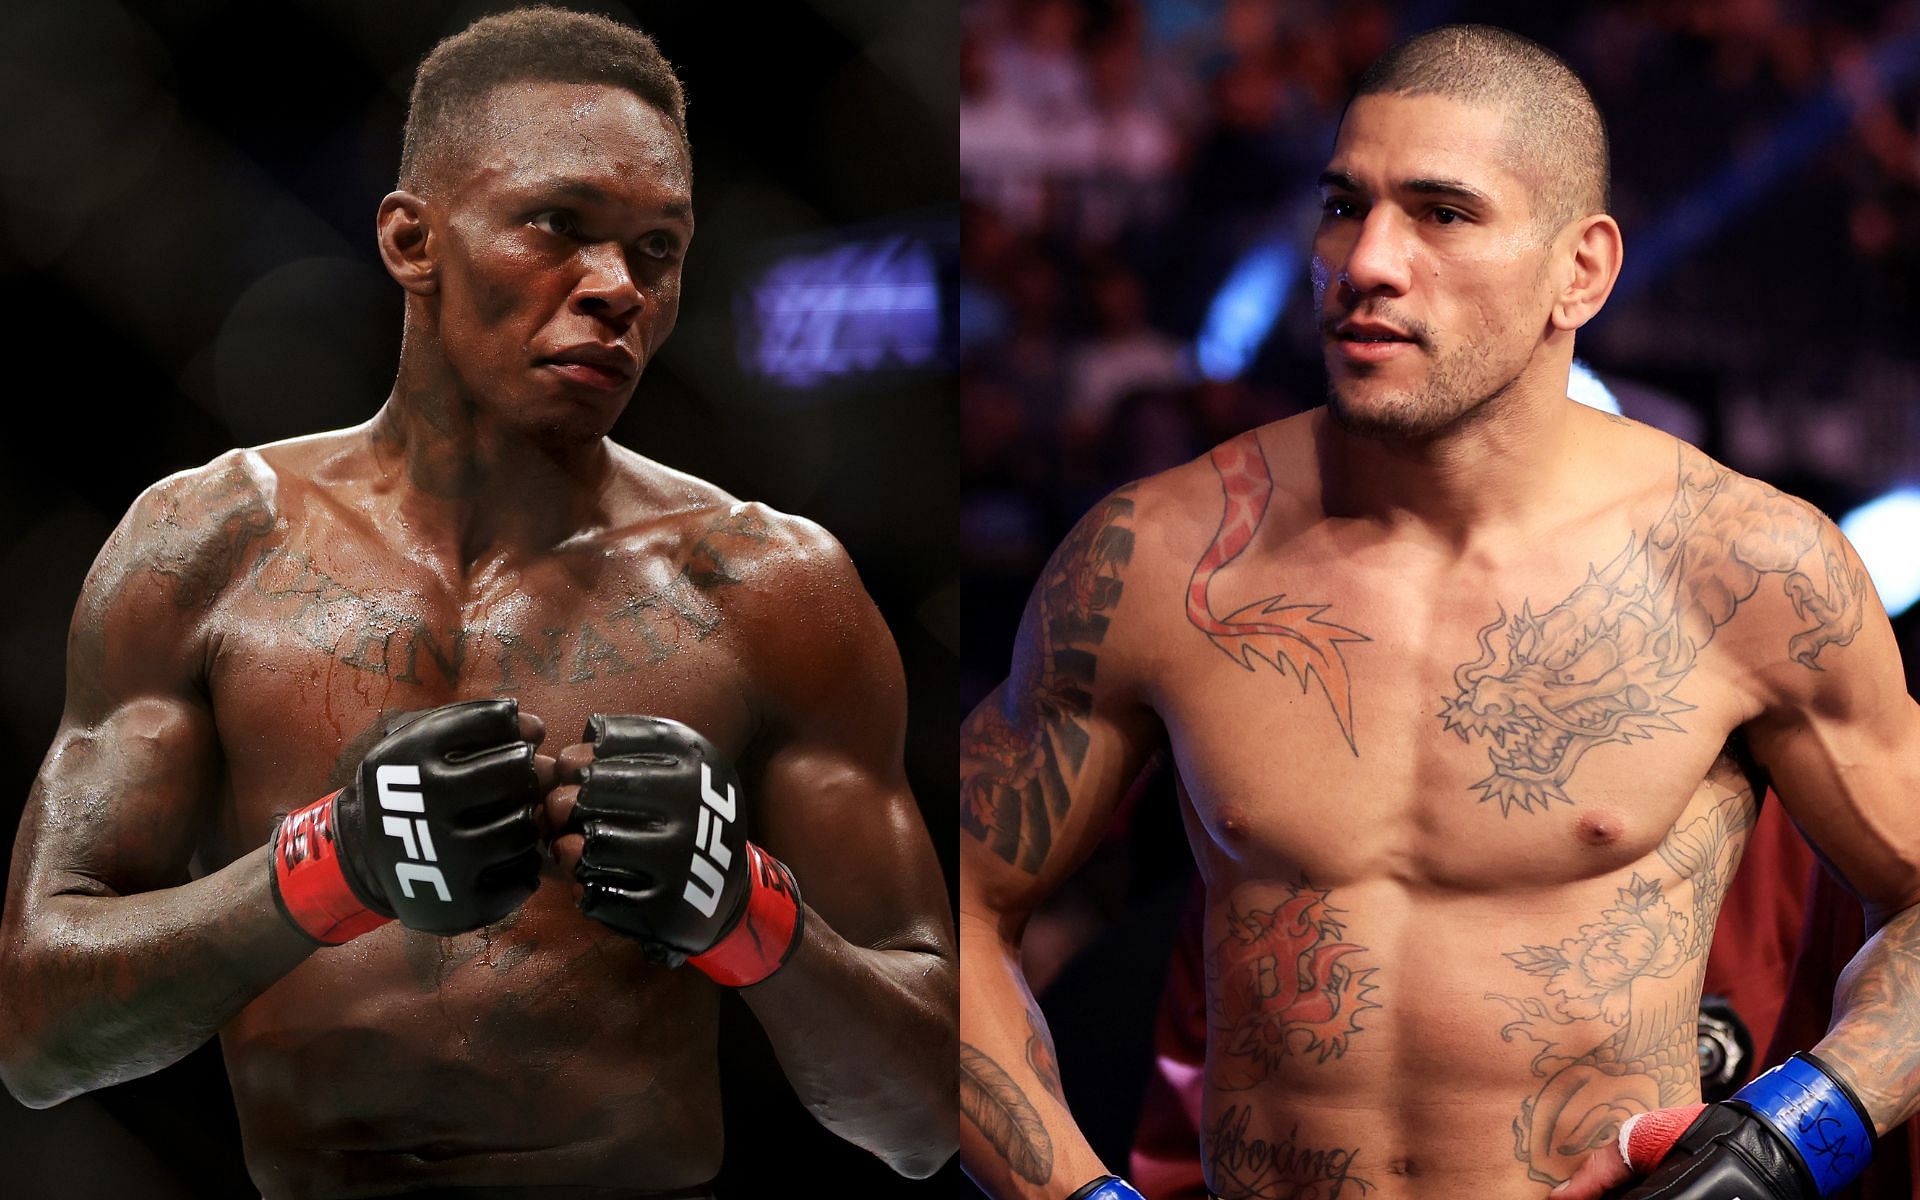 Israel Adesanya (left) and Alex Pereira (right). [Images courtesy: both images from Getty Images]